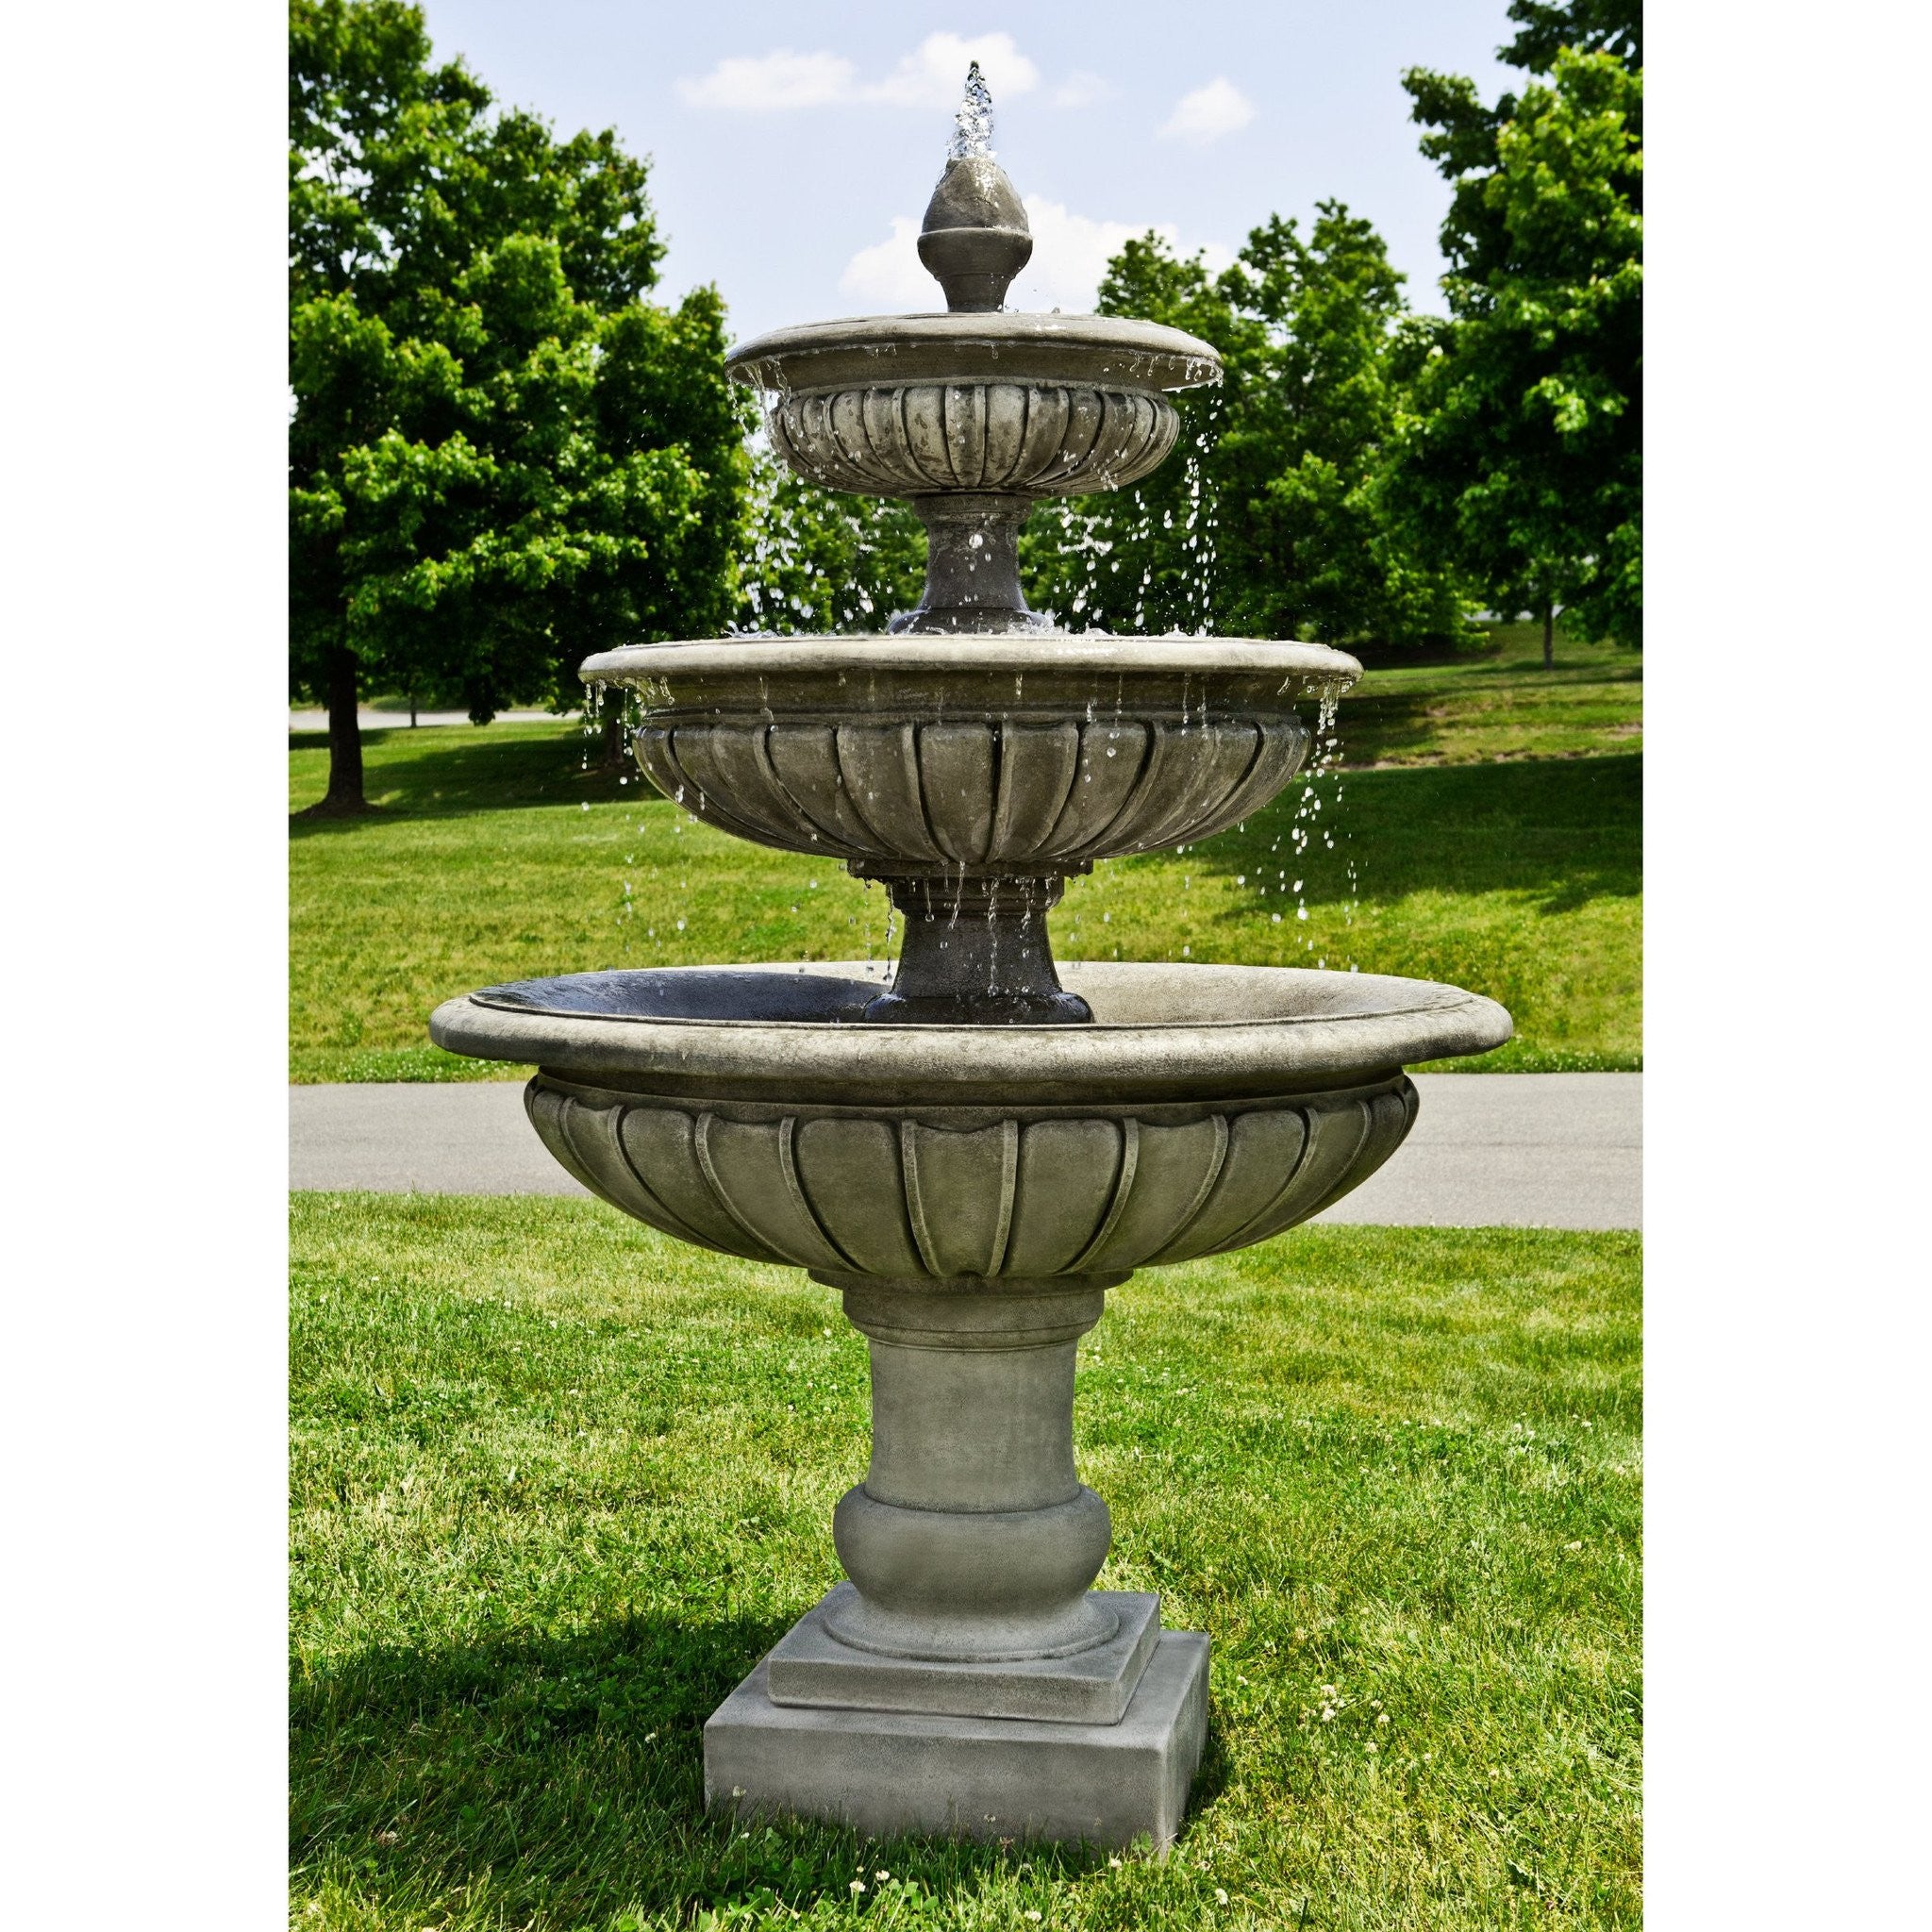 Where To Buy Outdoor Water Fountains